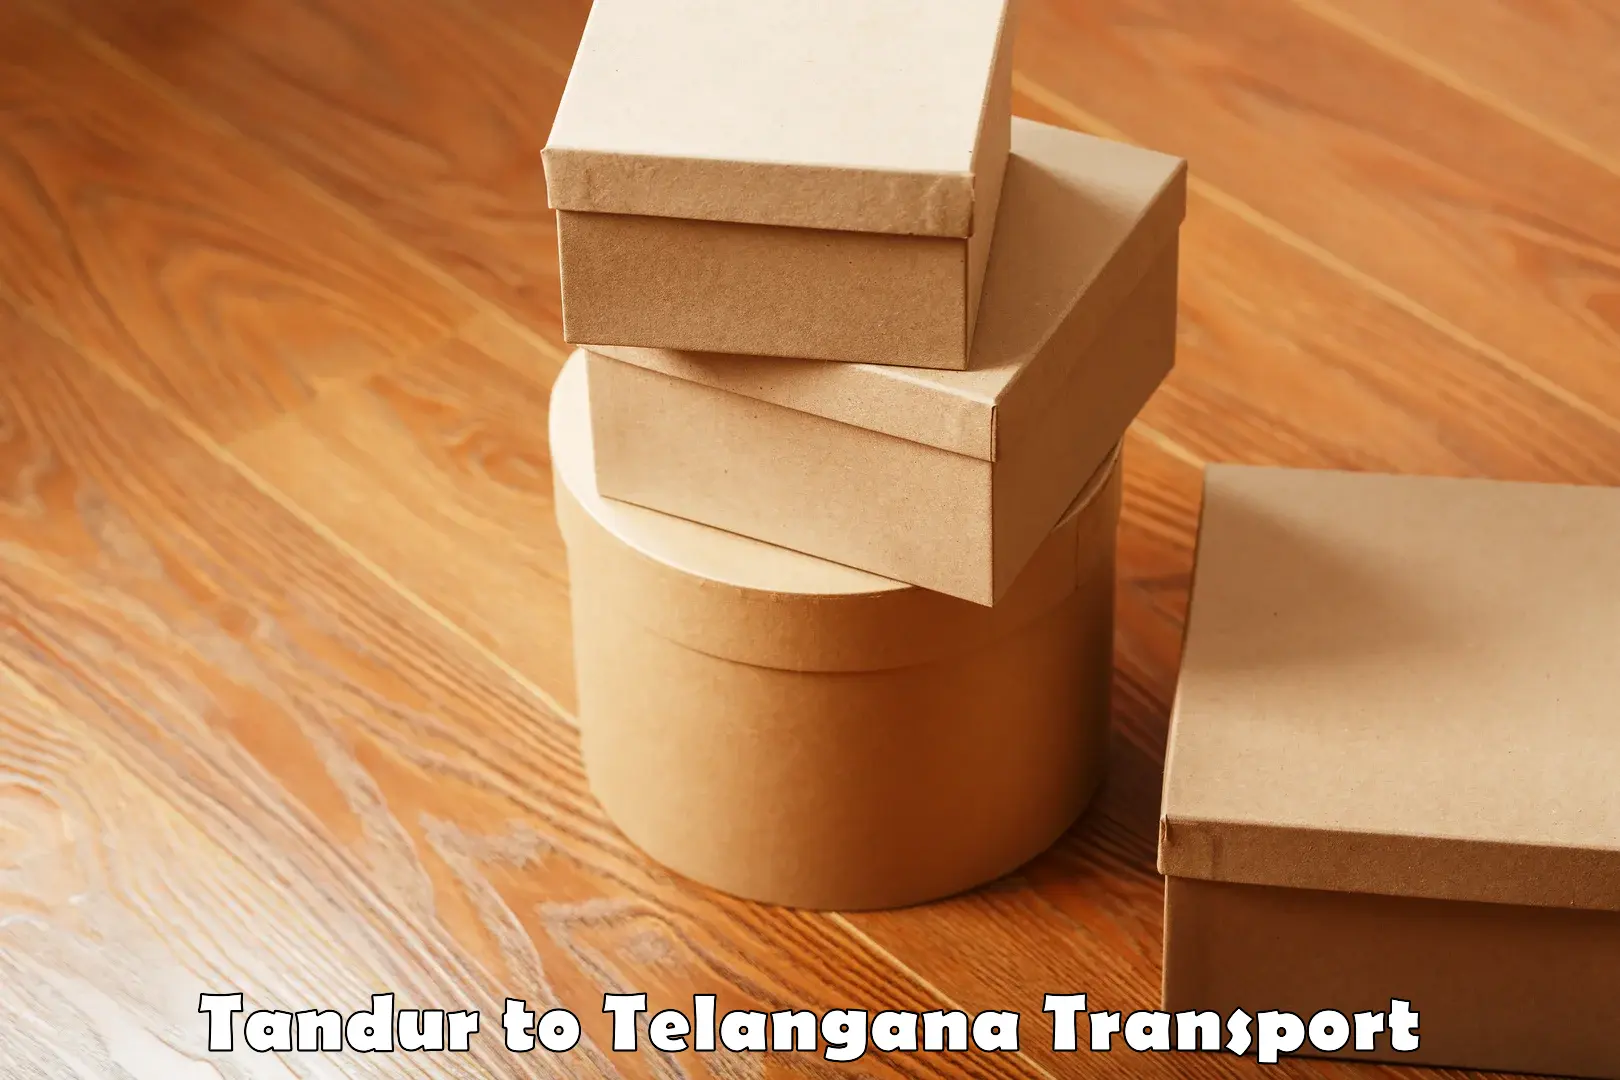 Container transportation services in Tandur to Shadnagar